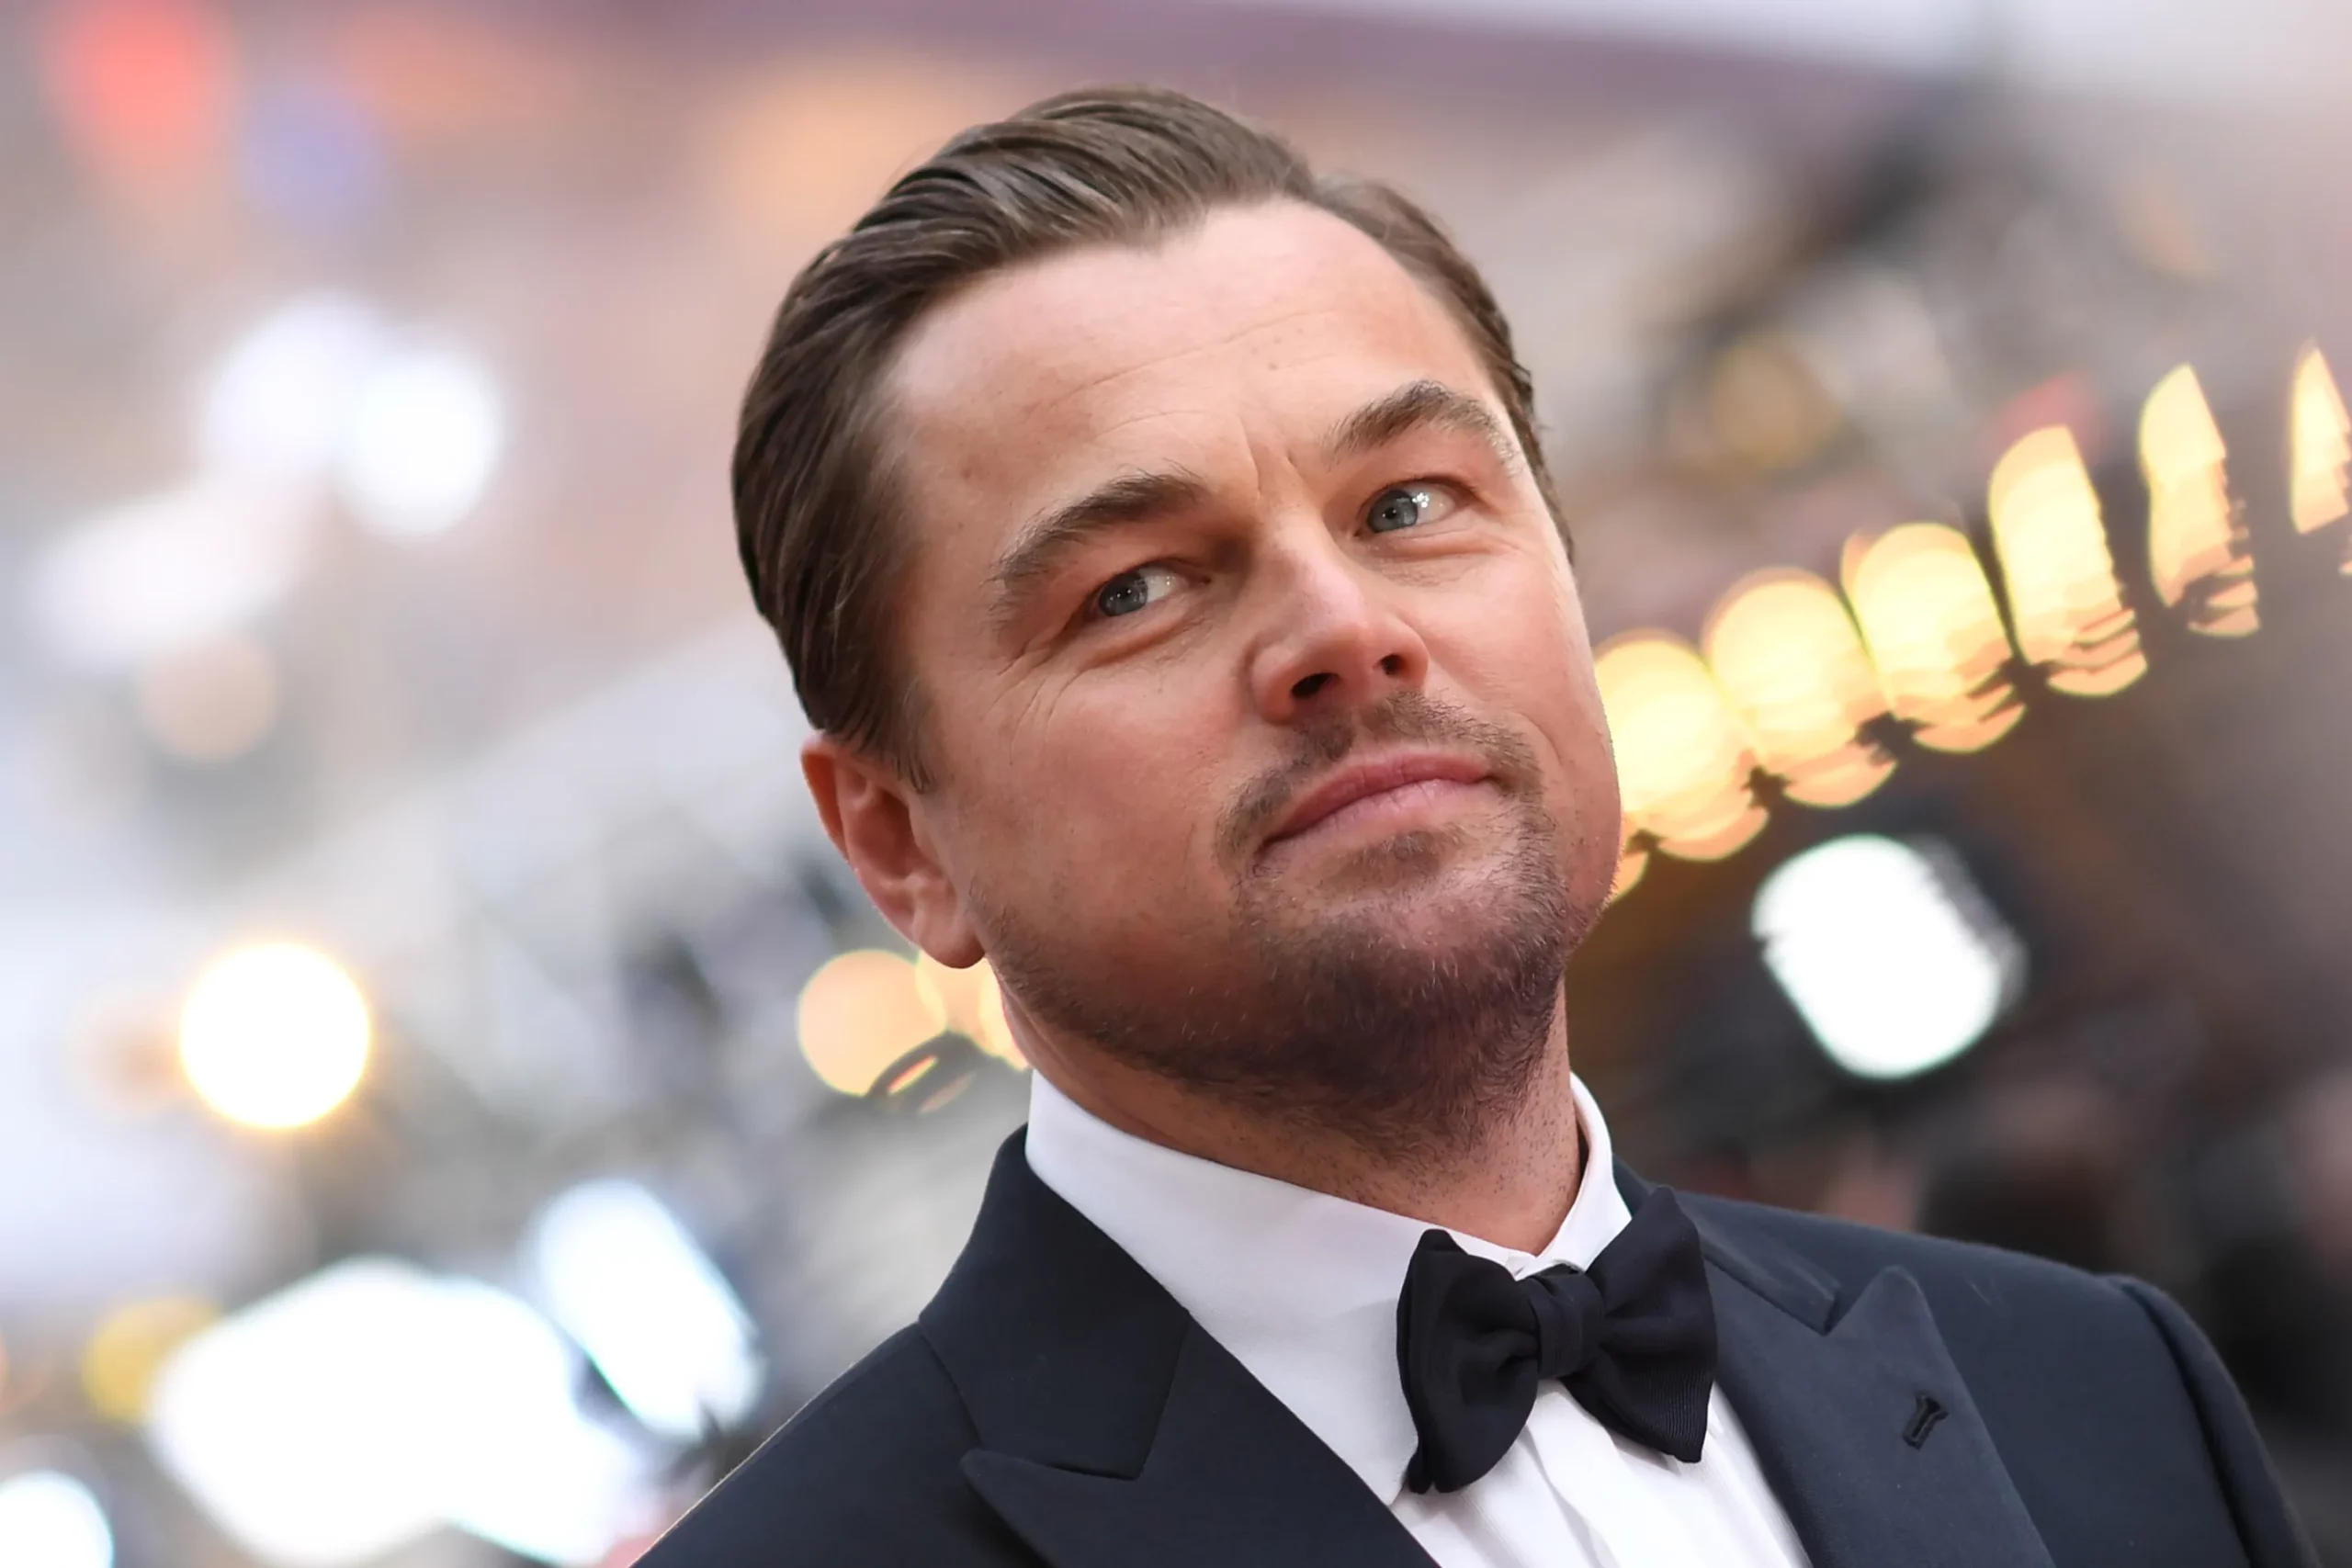 Leonardo Dicaprio listed as a witness in the Pras Michel money laundering case